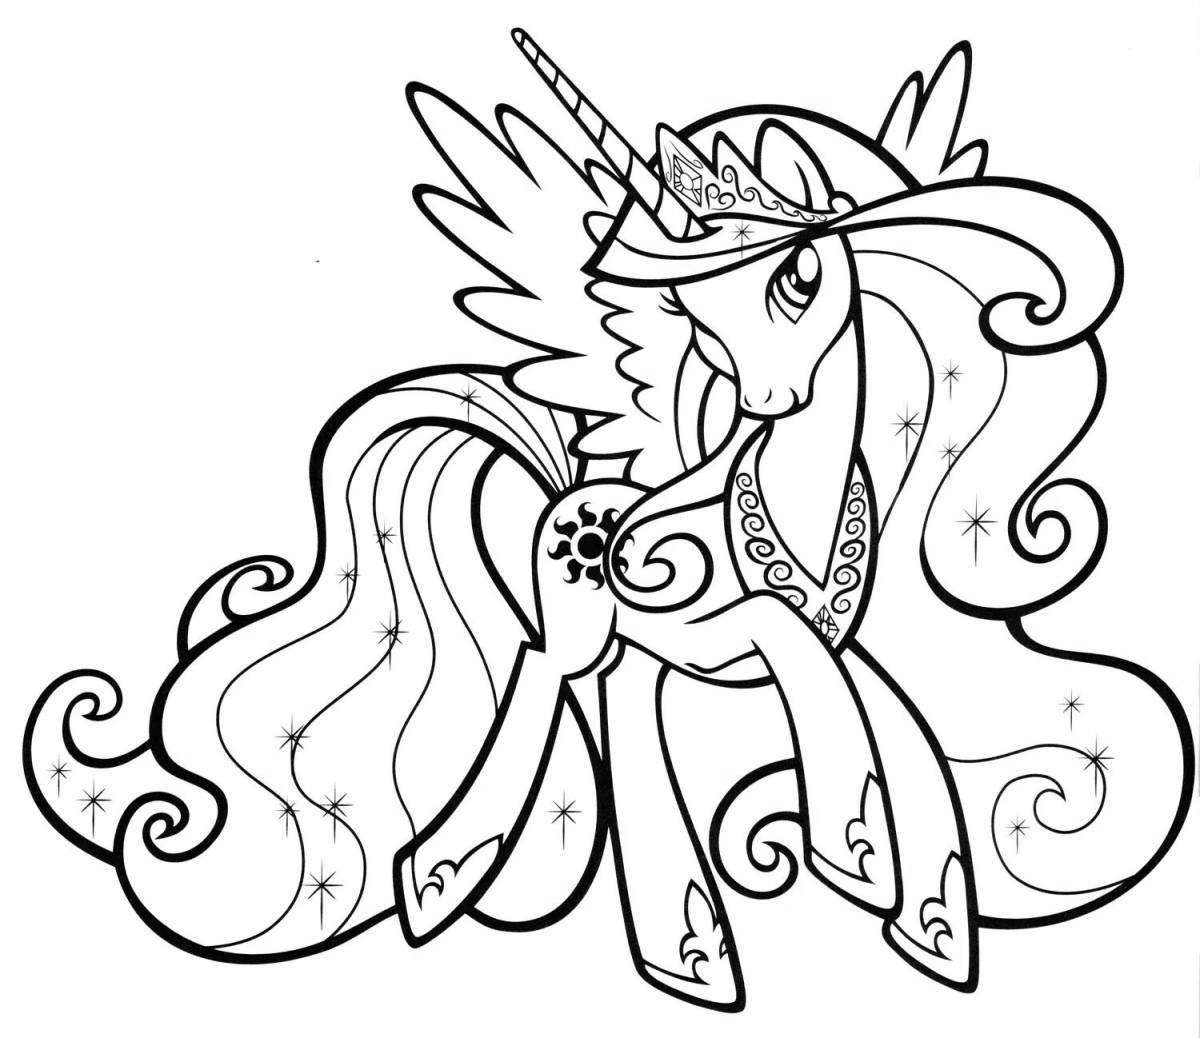 Glowing celestia coloring book for kids